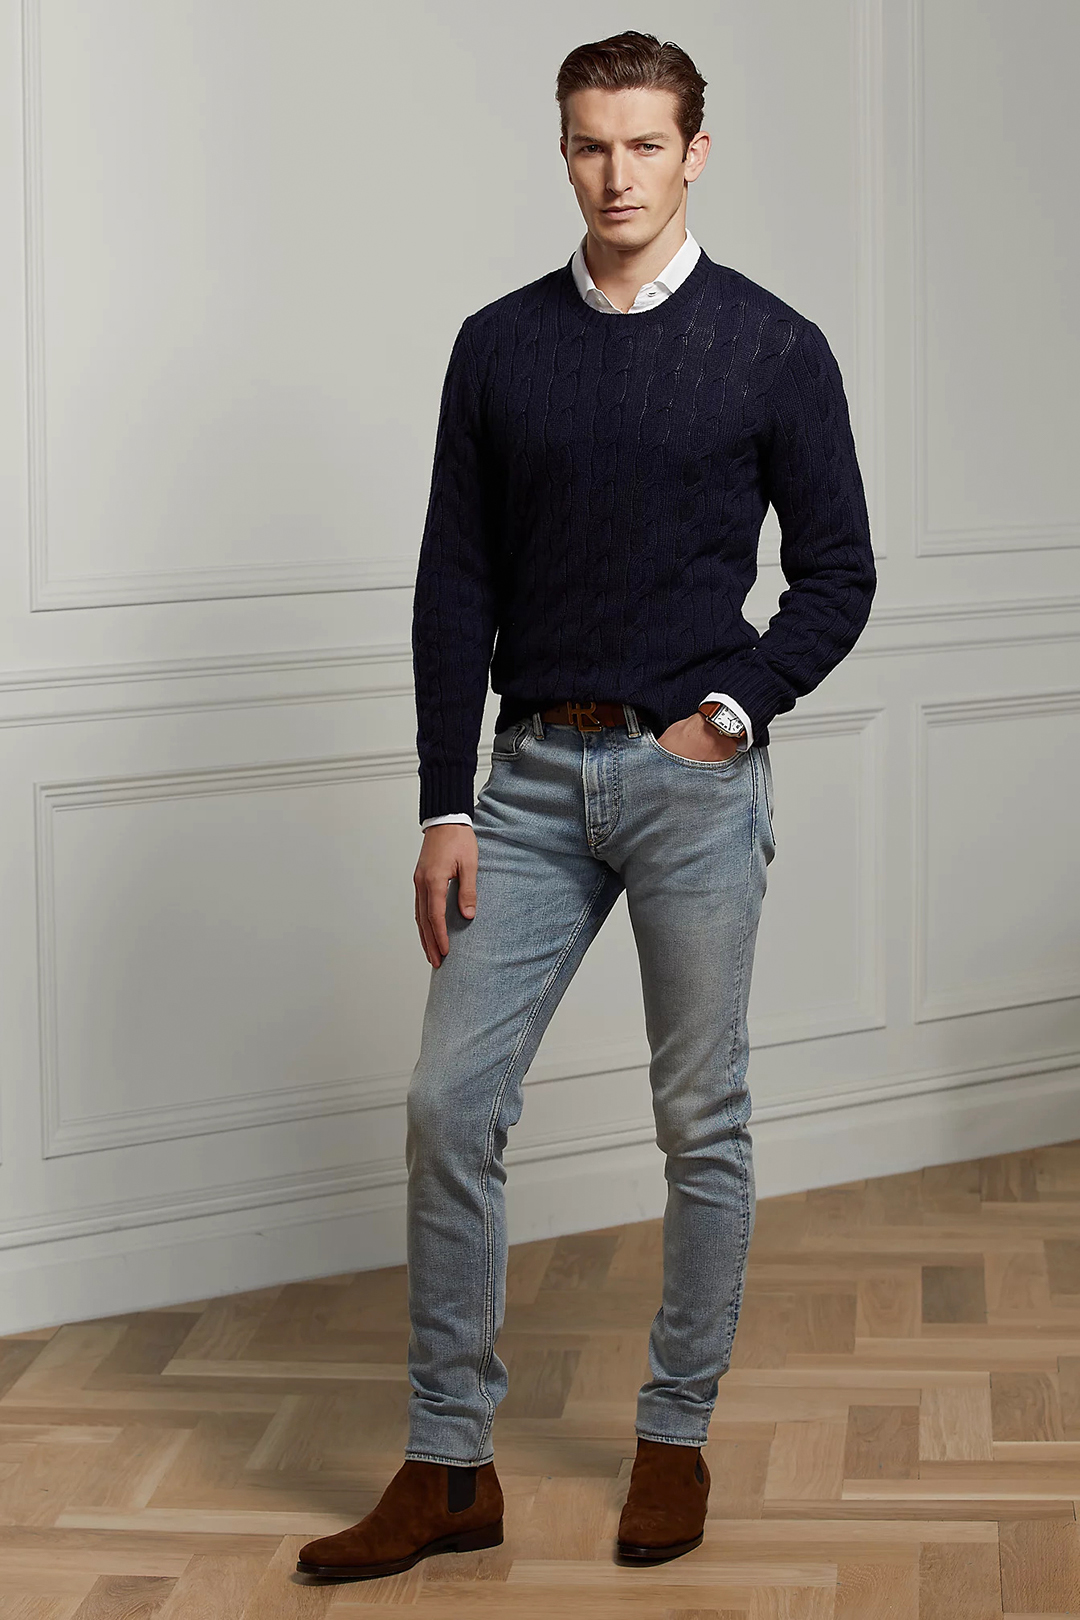 Navy sweater over white dress shirt, light blue denim jeans, and brown suede Chelsea boots outfit